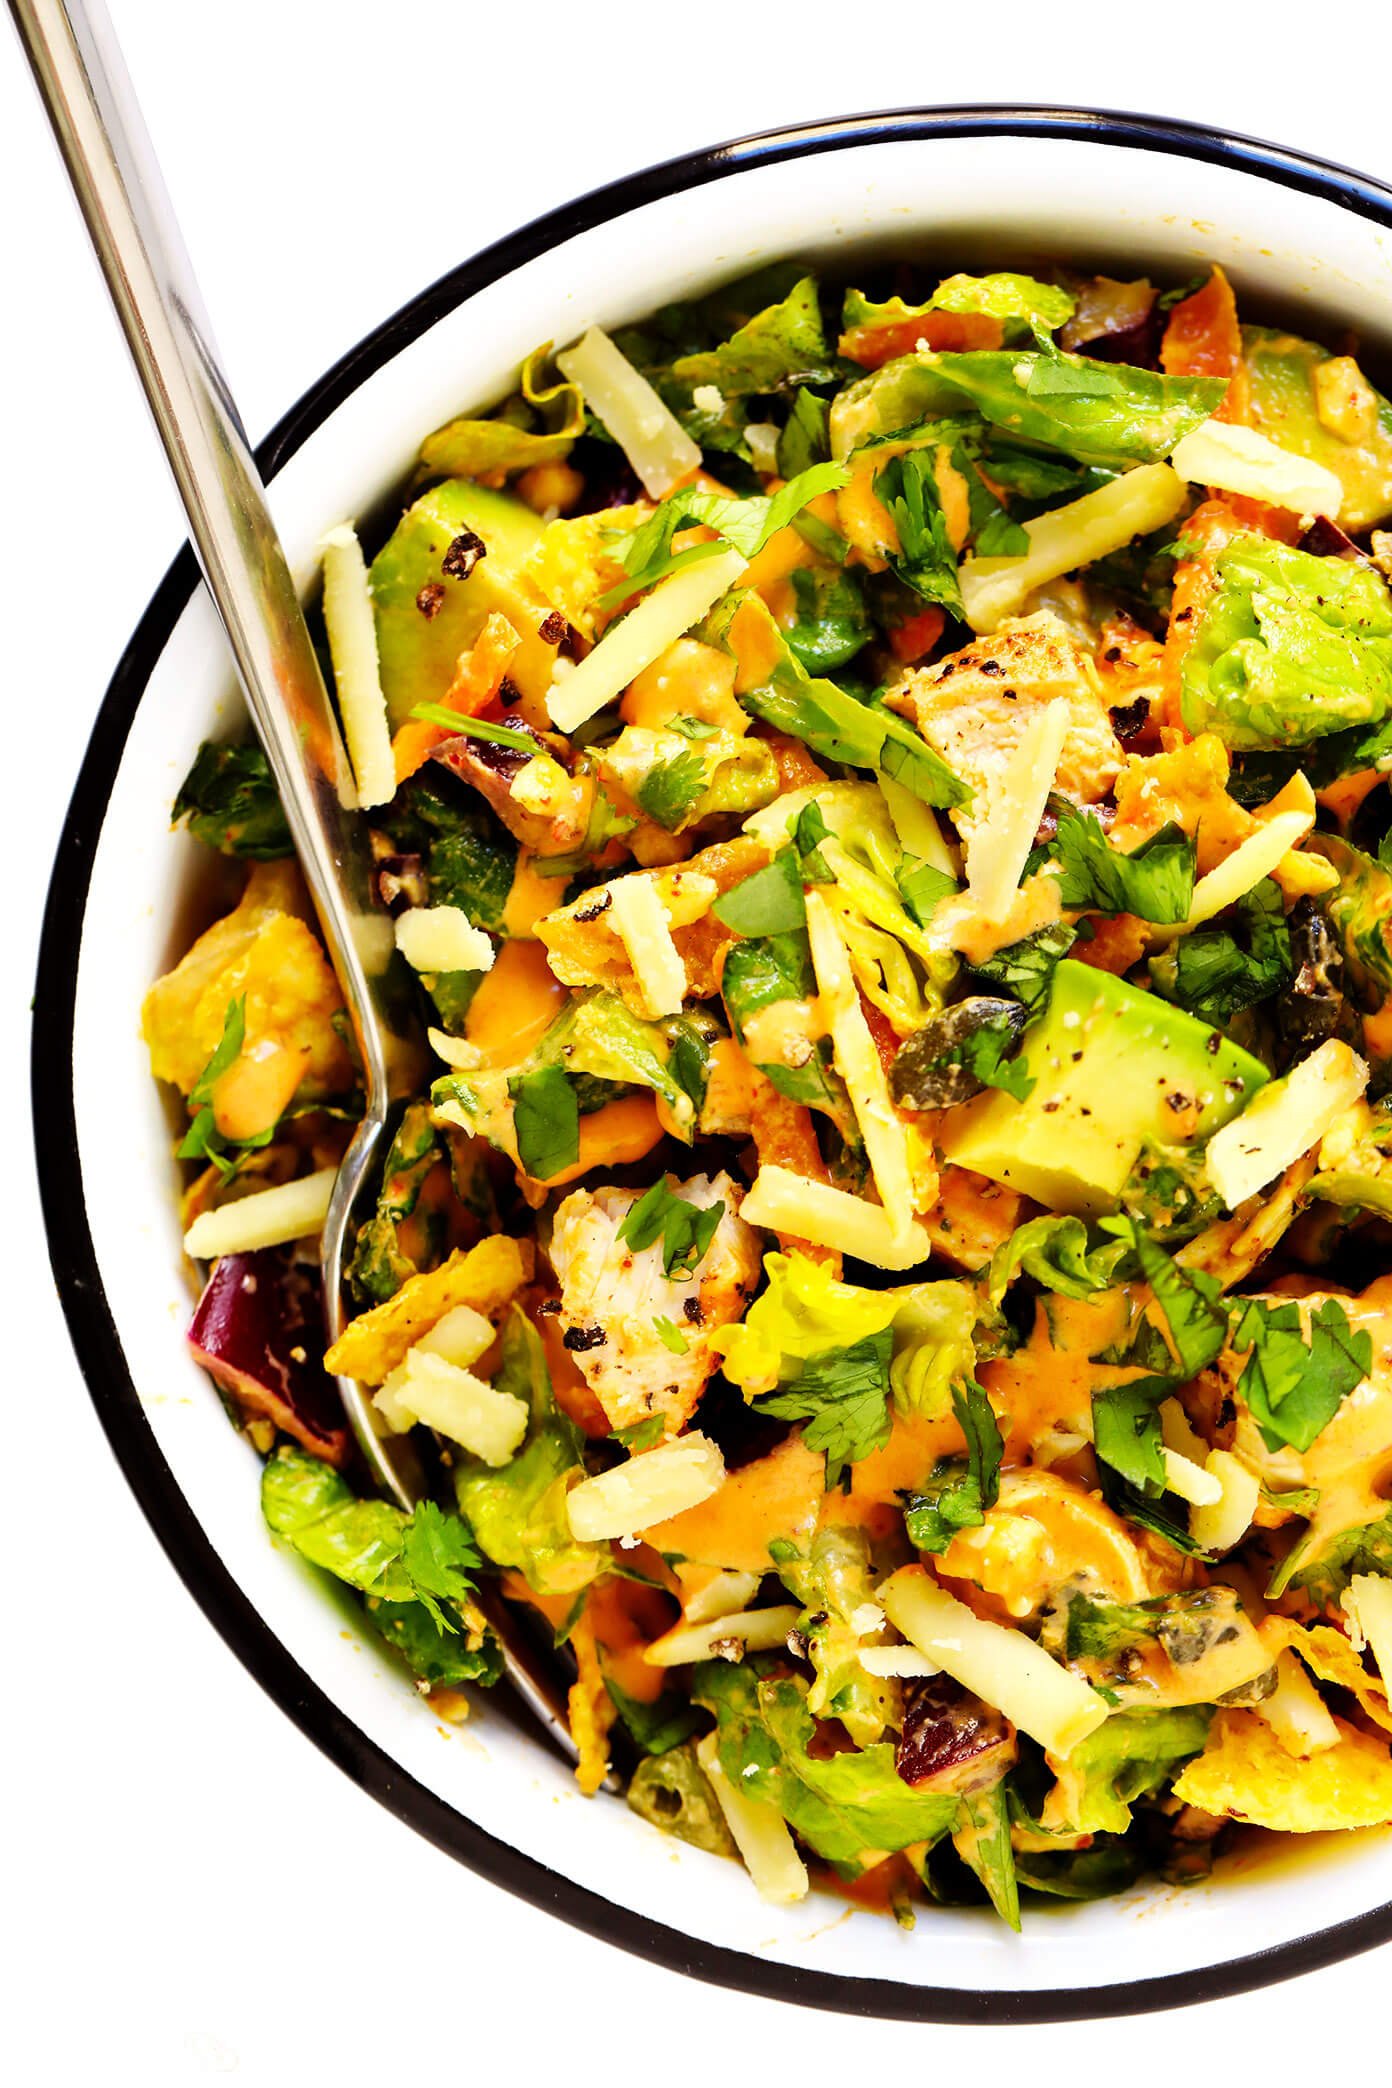 Chopped Salad with Chipotle Dressing Mixed In